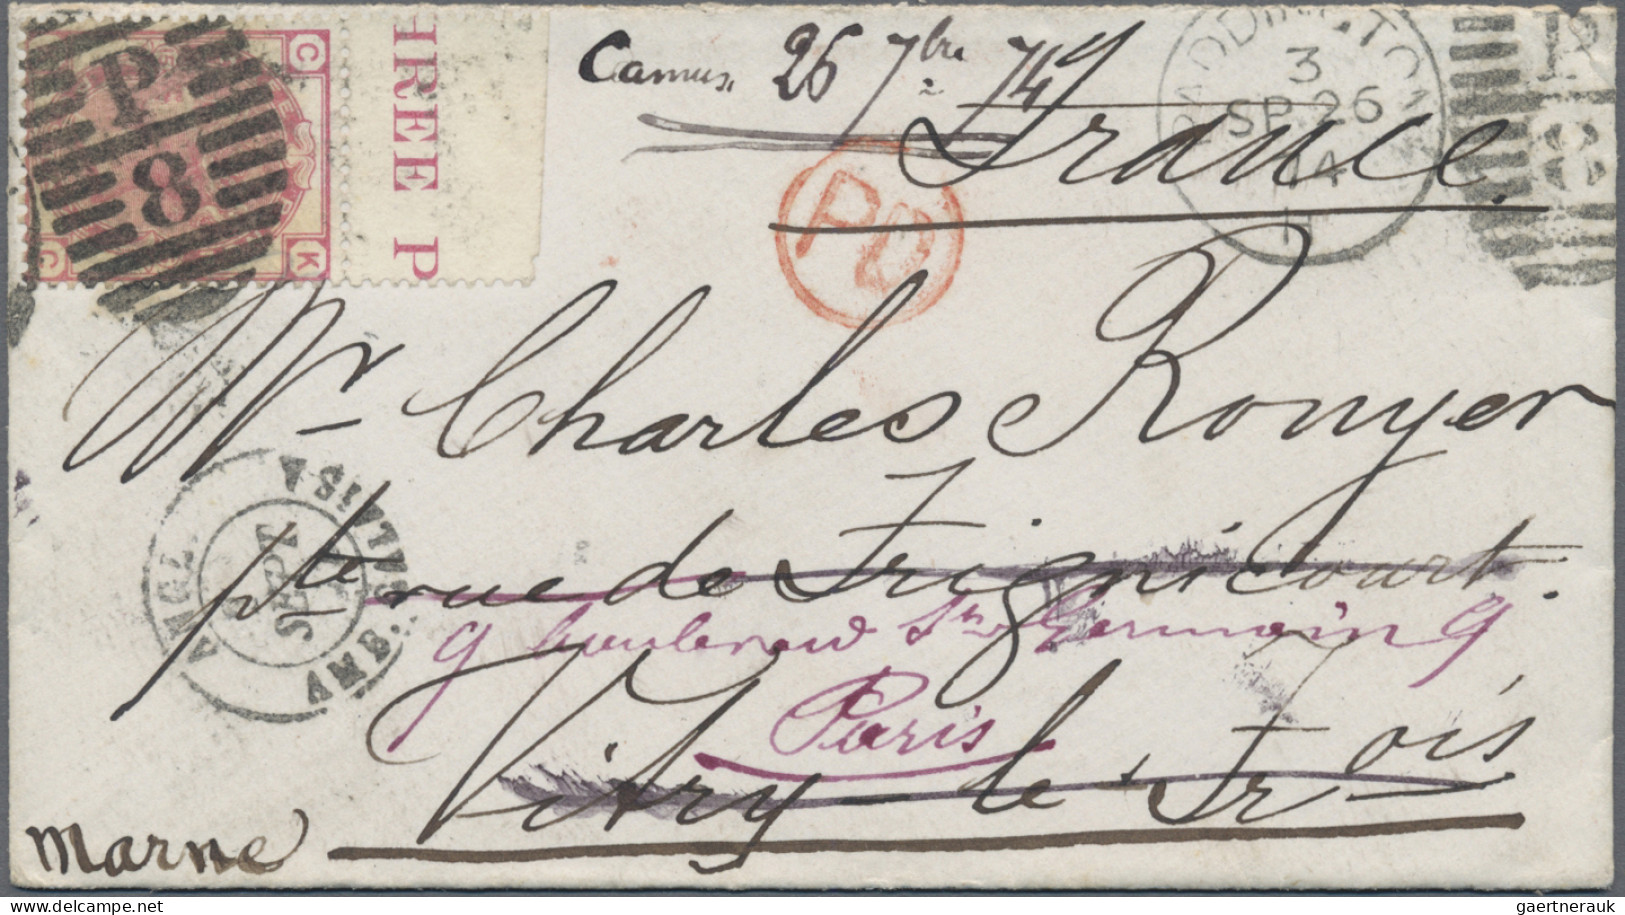 Ireland: 1740/1922 (ca.), balance of approx. 70 entires, thereof approx. 50 stam